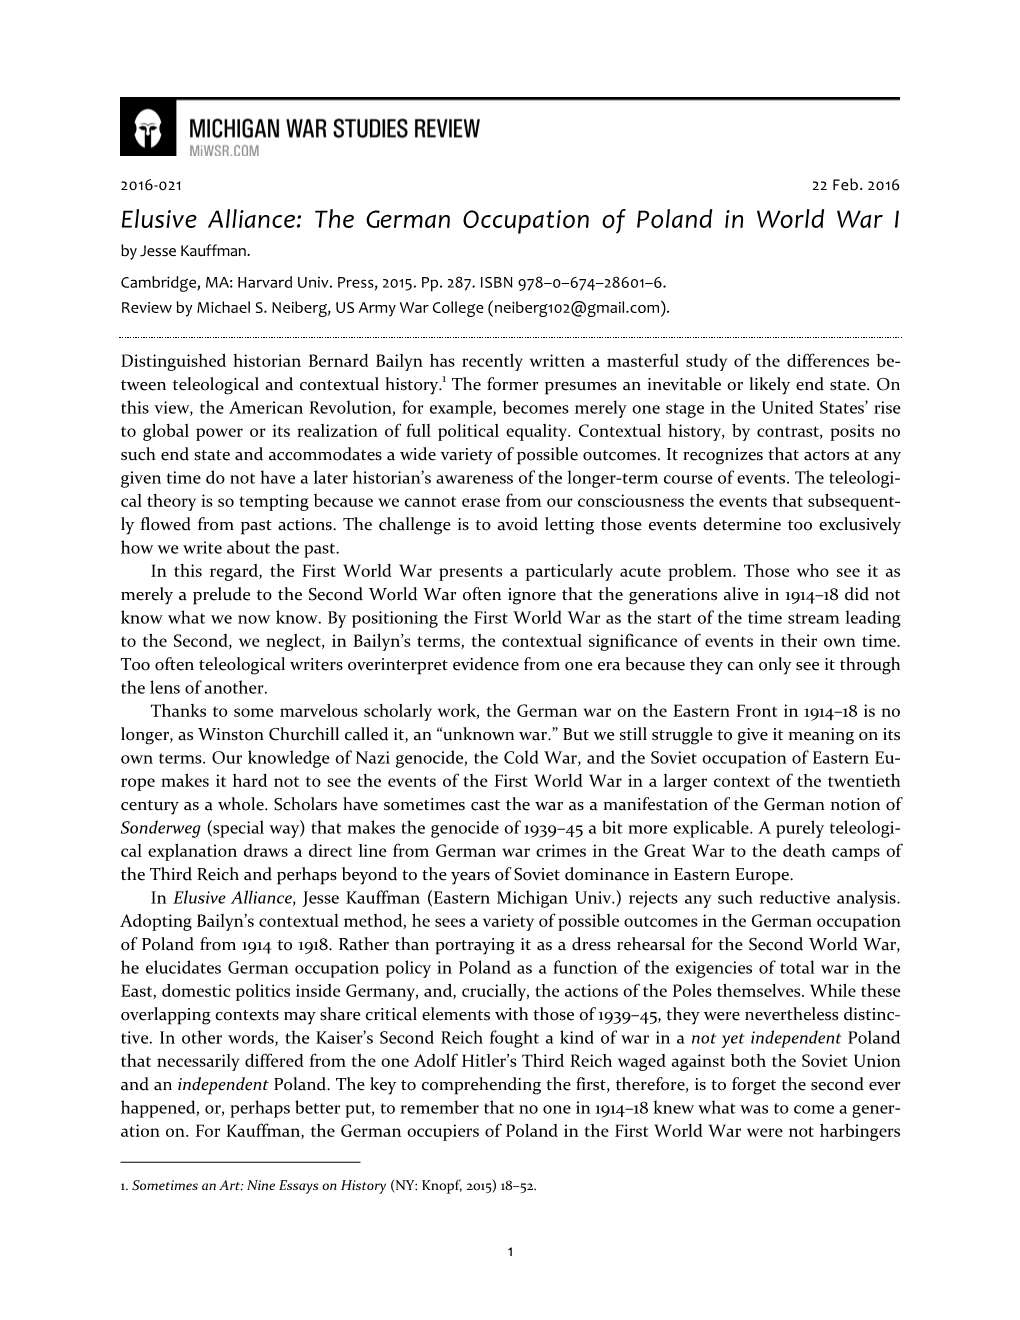 The German Occupation of Poland in World War I by Jesse Kauffman